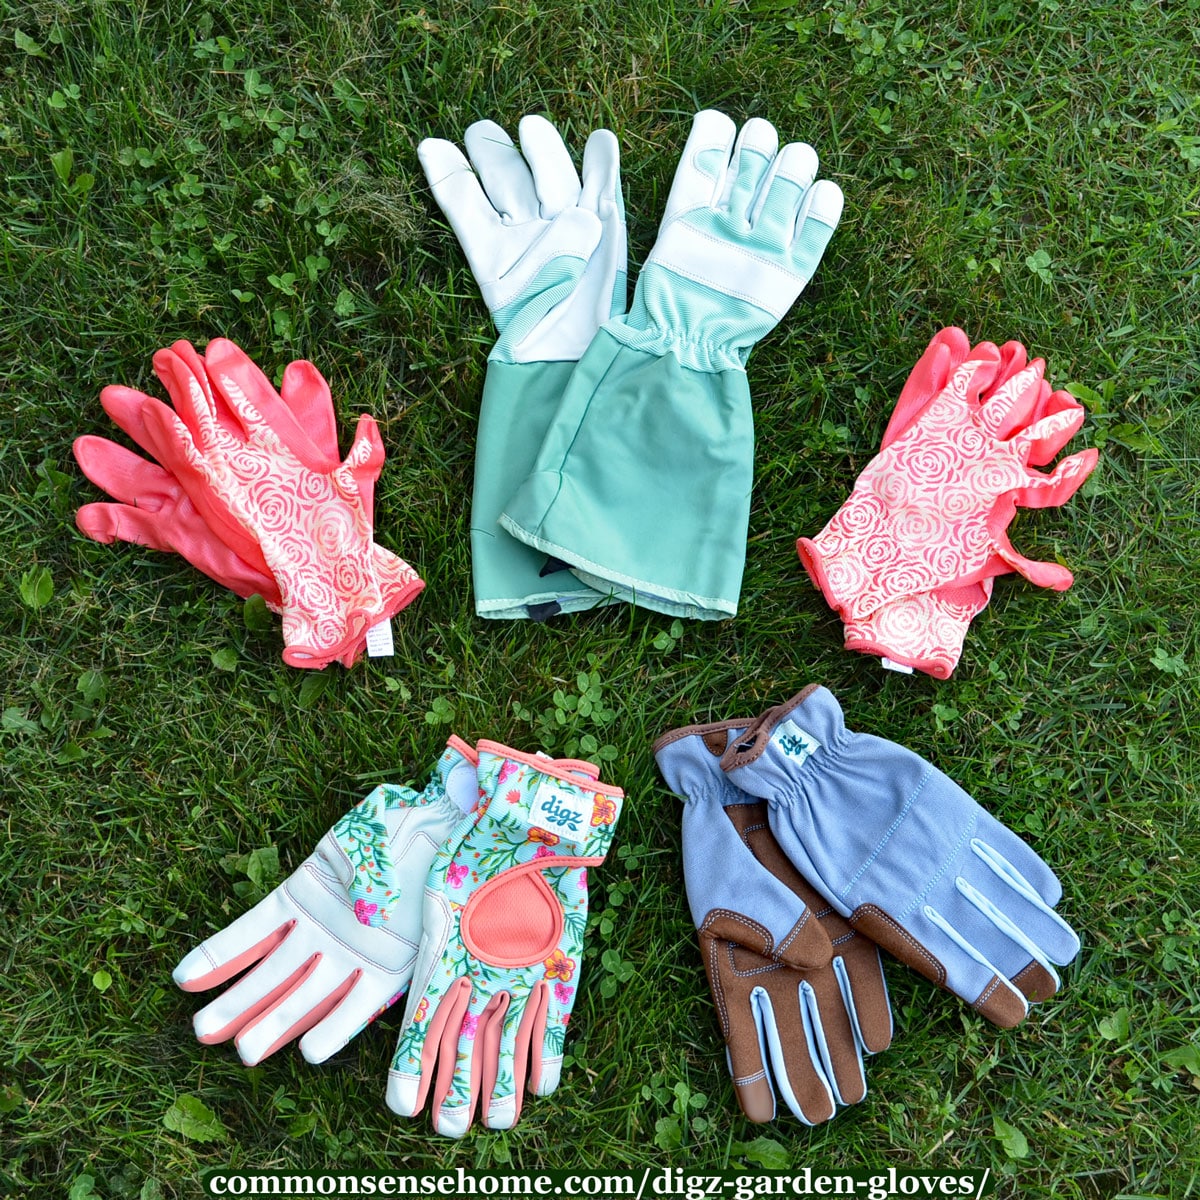 assorted Digz gloves